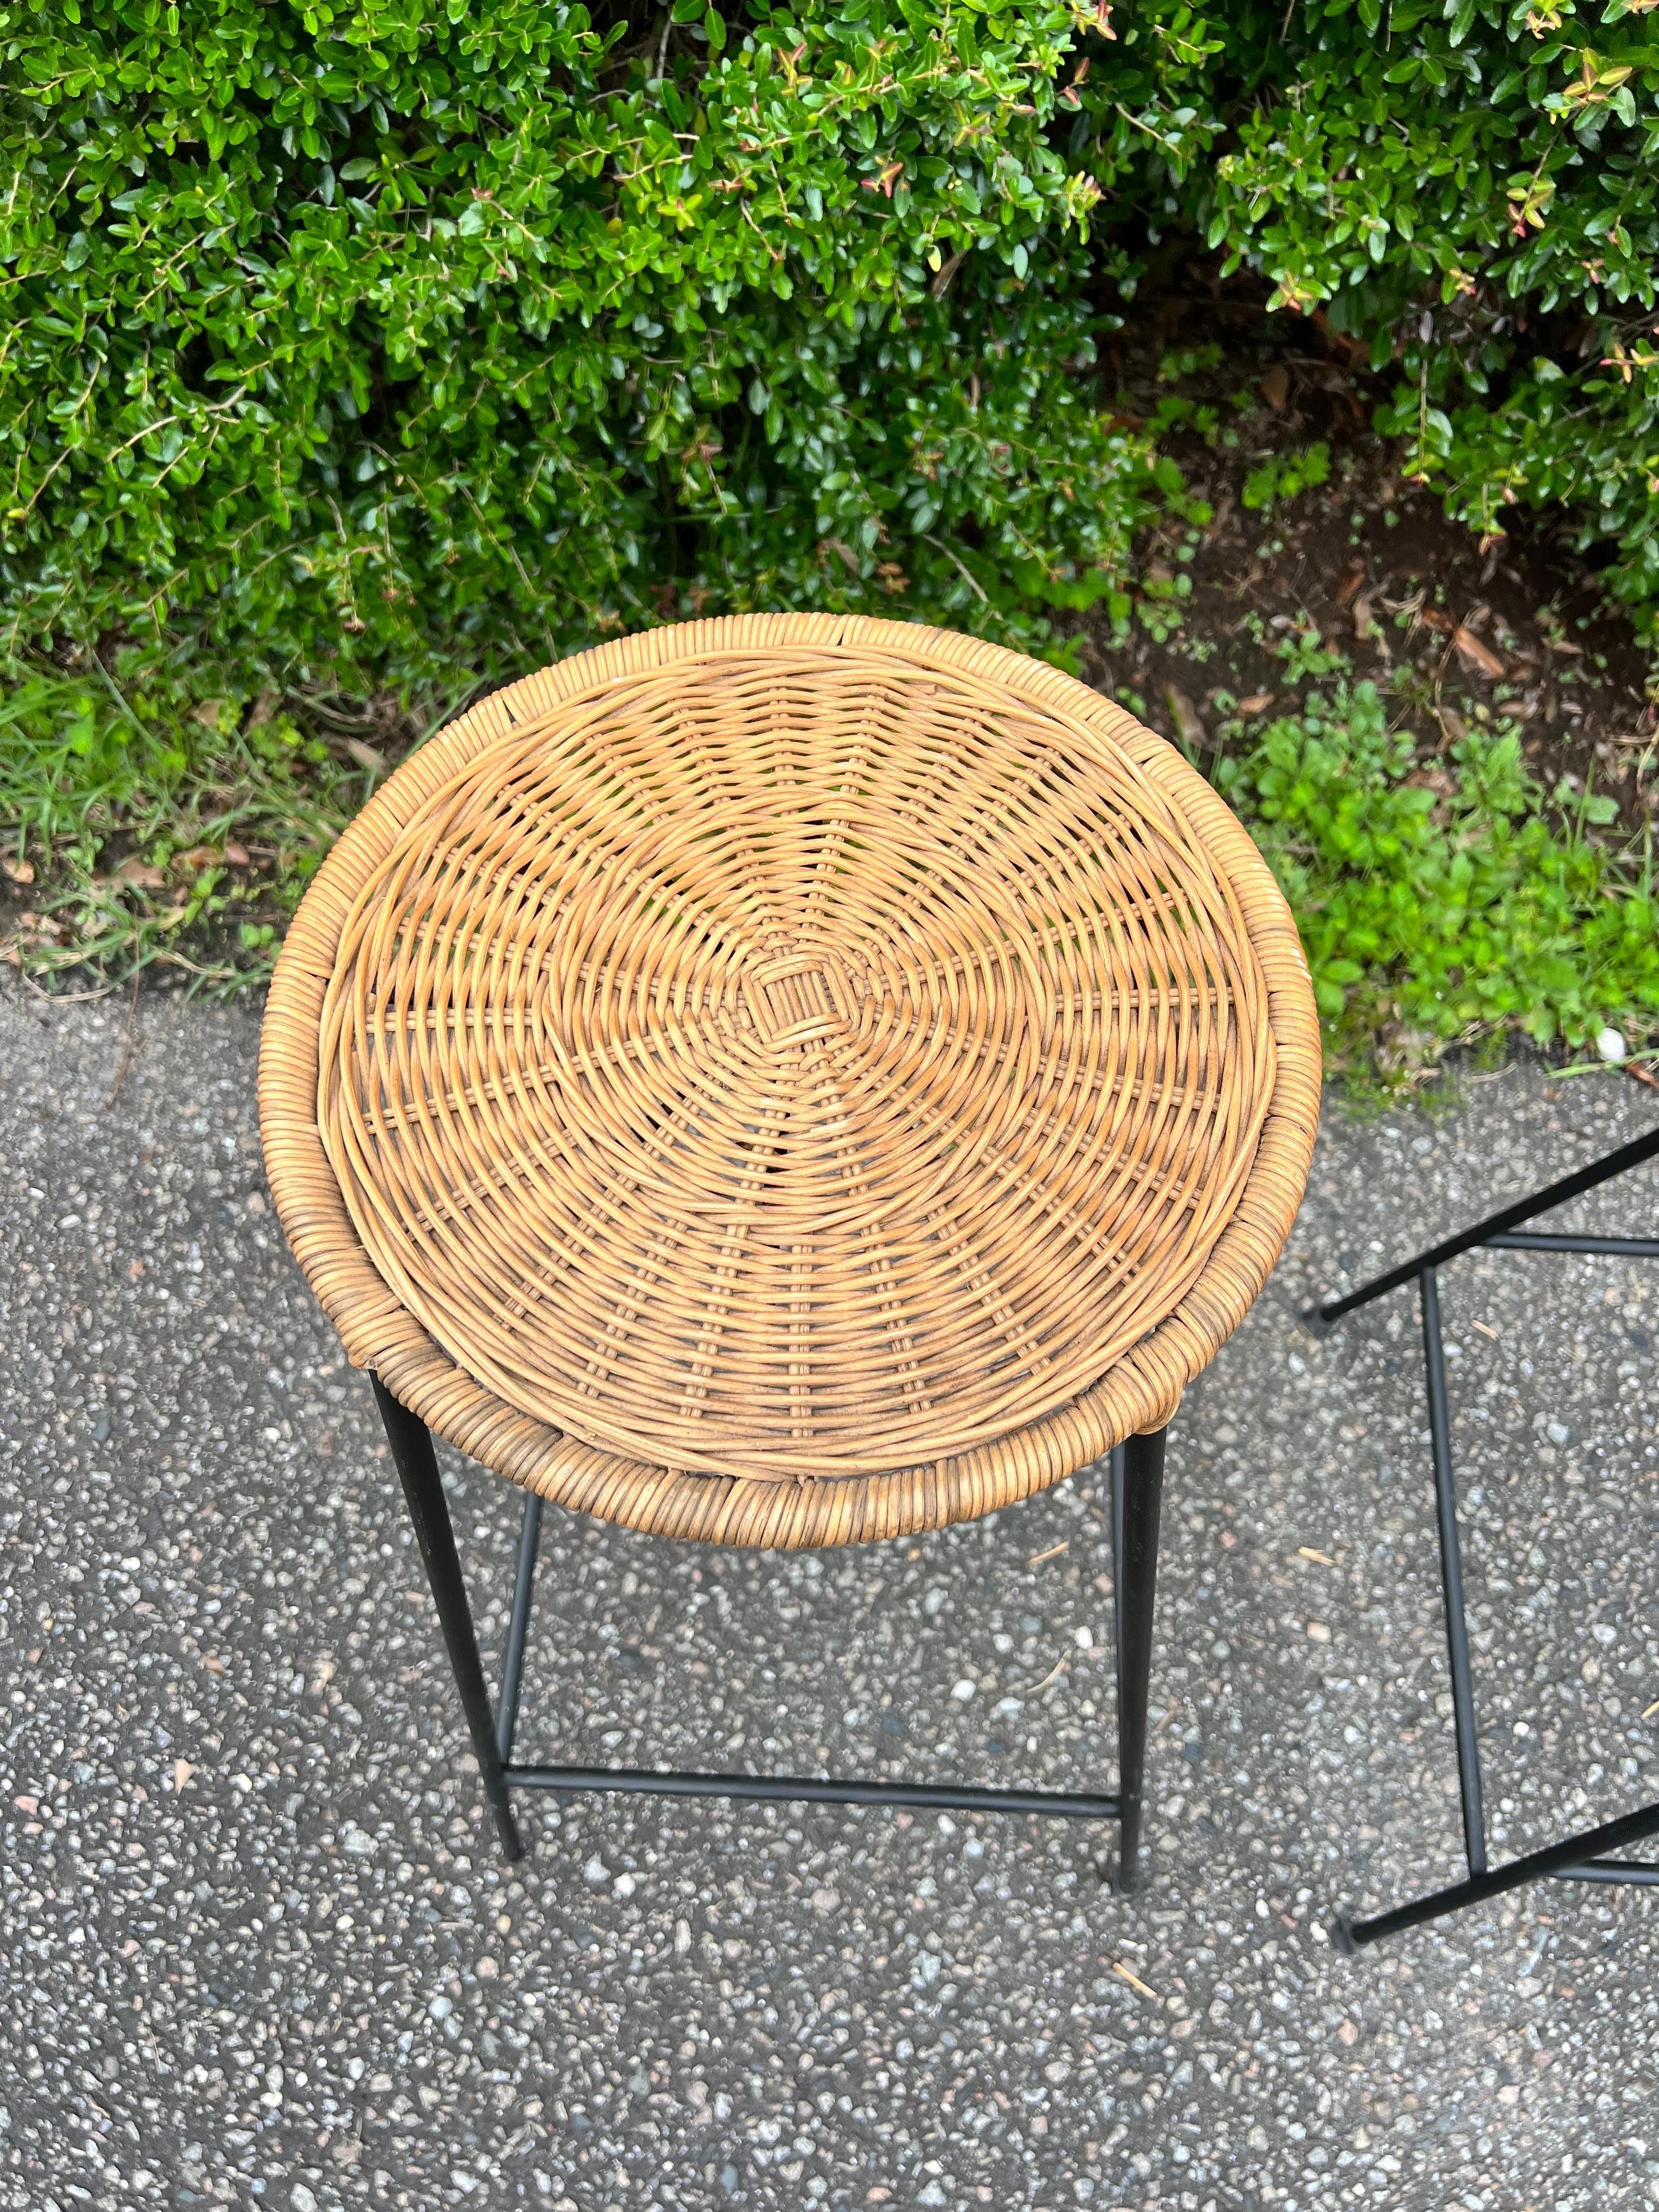 Often misattributed to Arthur umanoff, these fabulous bar stools were in production from the 1950’s-1960’s by The Fong Brothers Company.    The seats are made of a woven rattan with black metal legs.  These are perfect for your mid-century modern